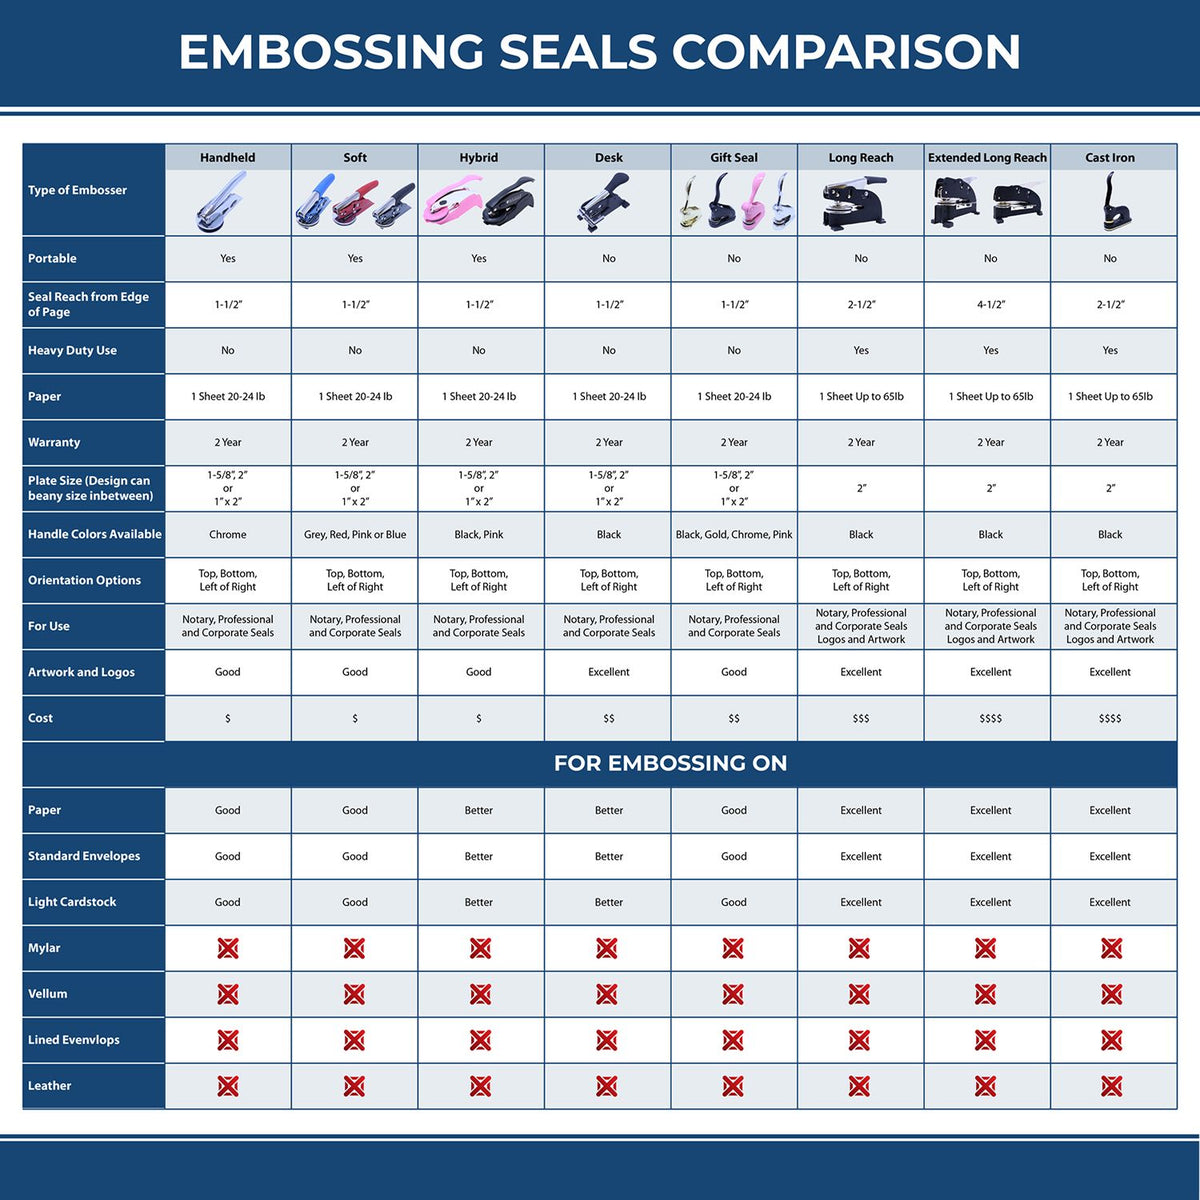 A comparison chart for the different types of mount models available for the Handheld Nevada Professional Engineer Embosser.